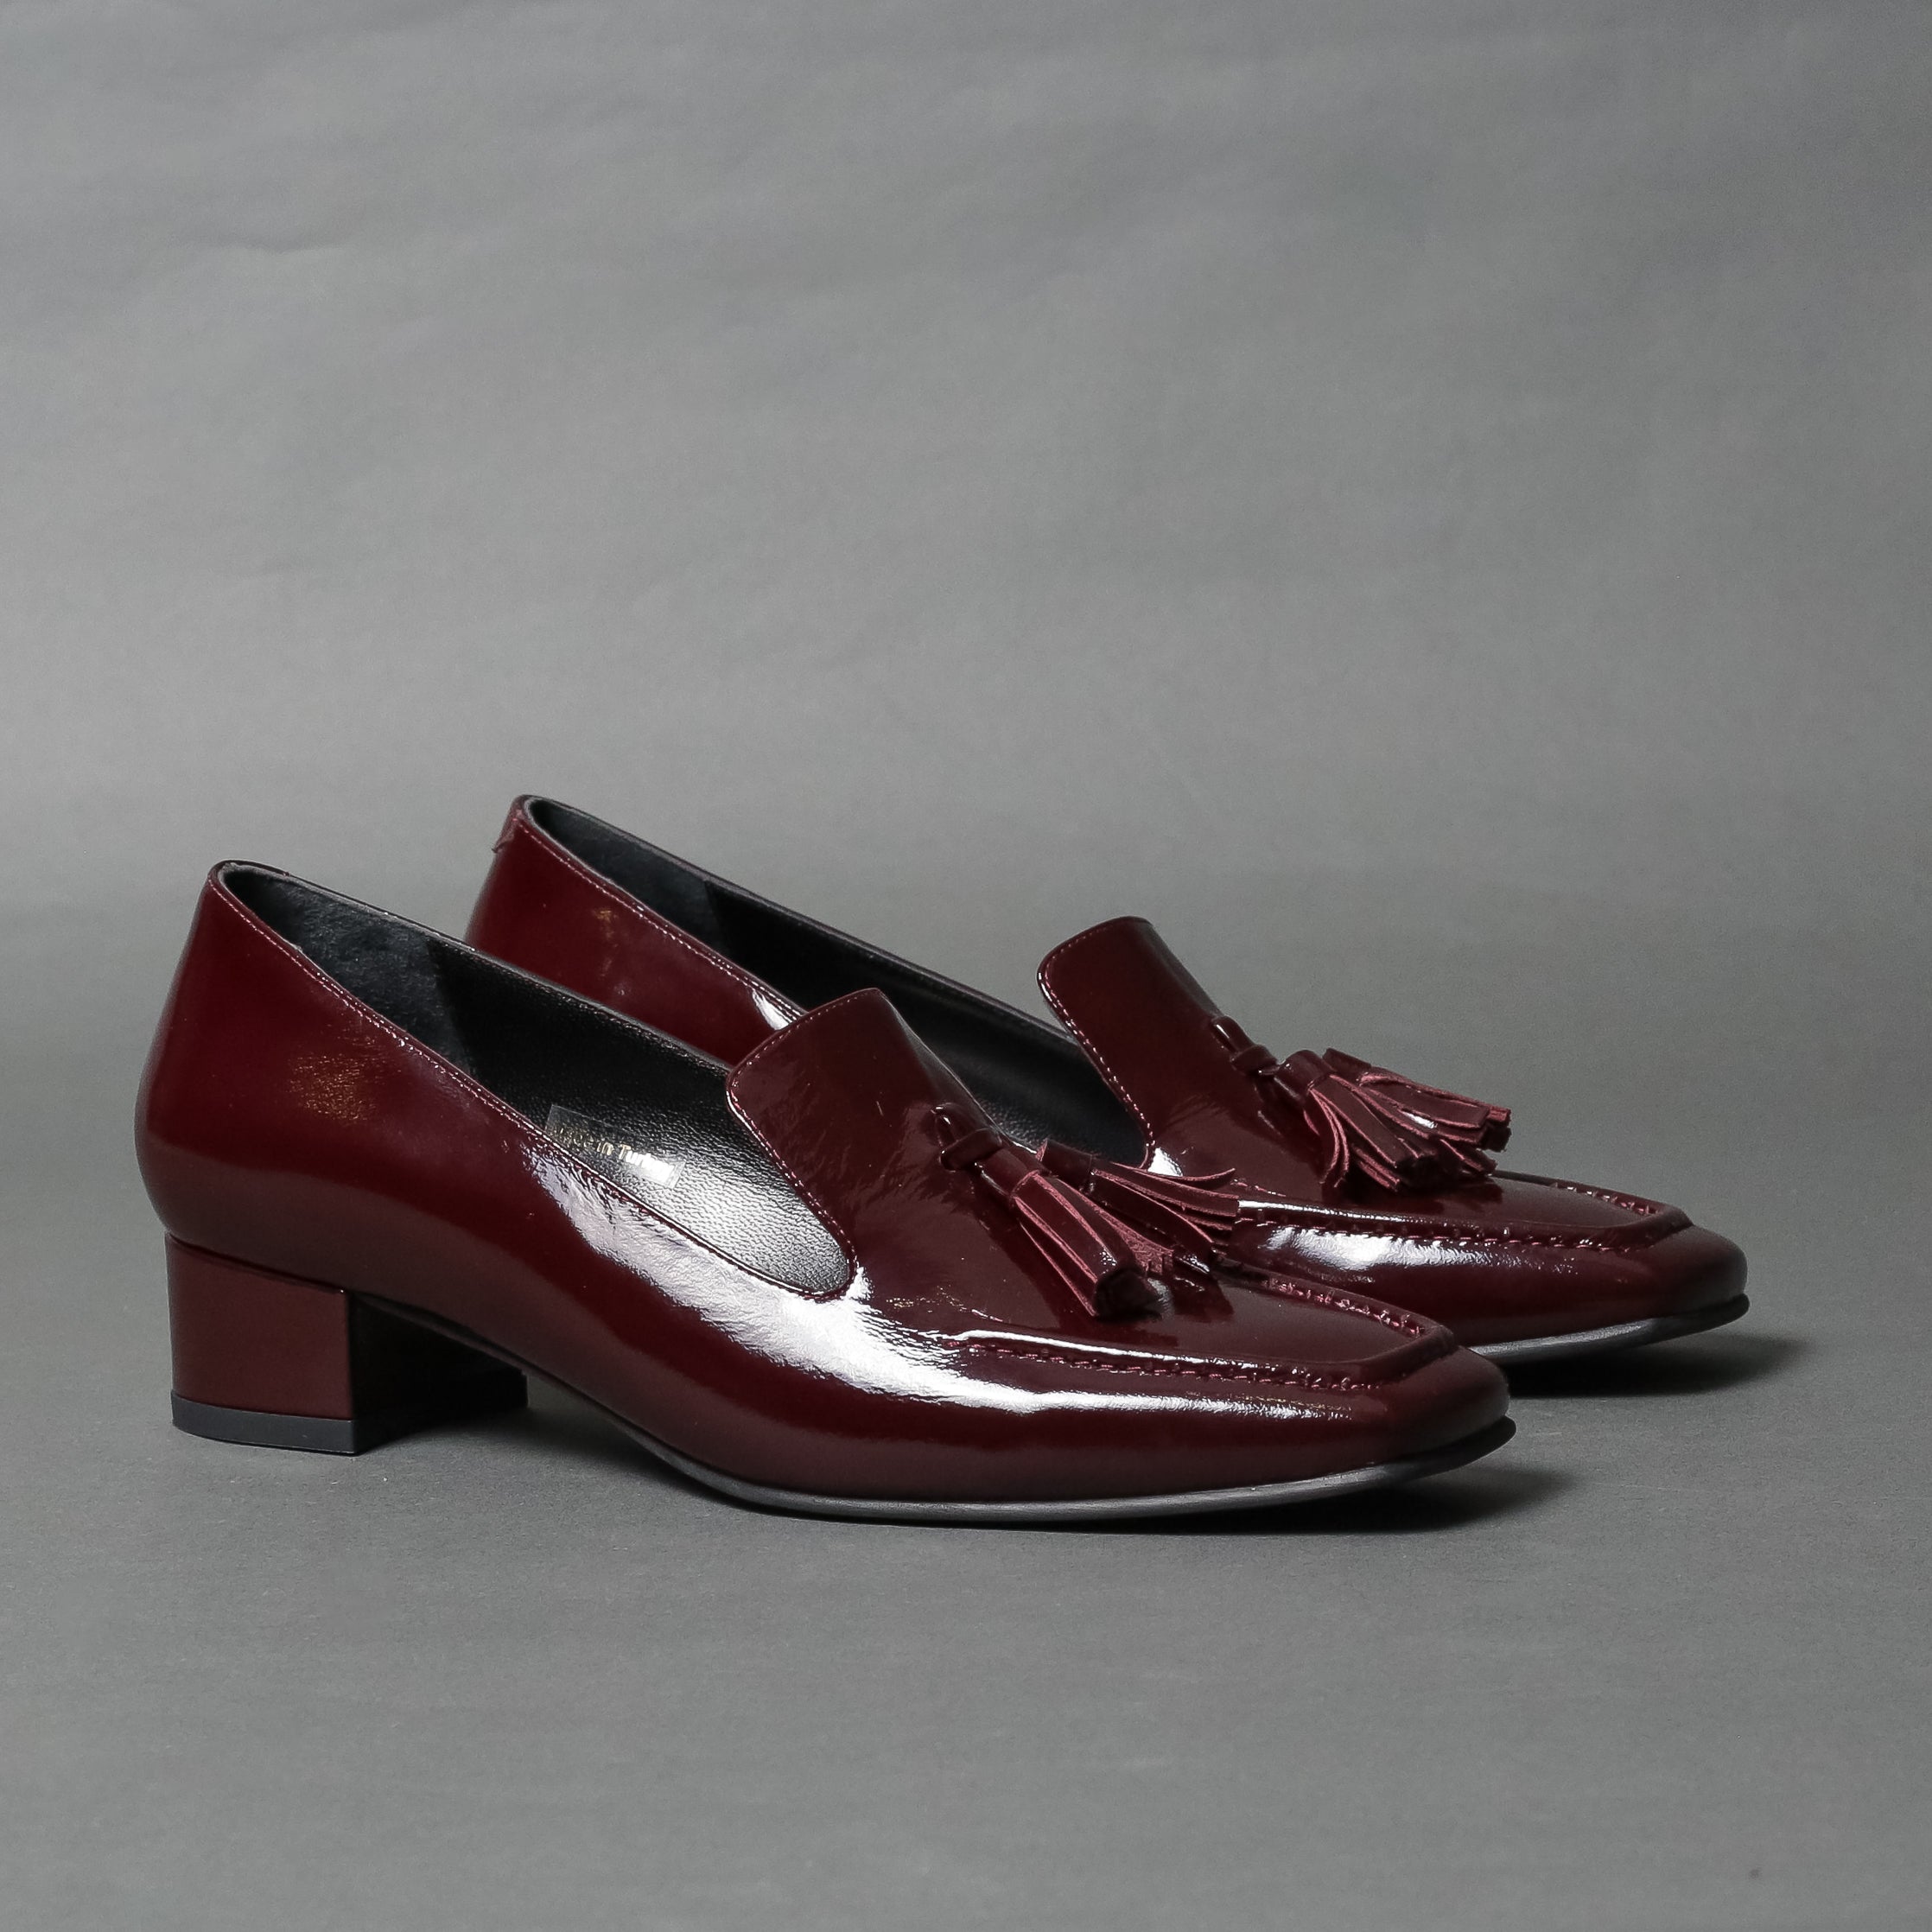 A024 Burgundy - 124 Shoes